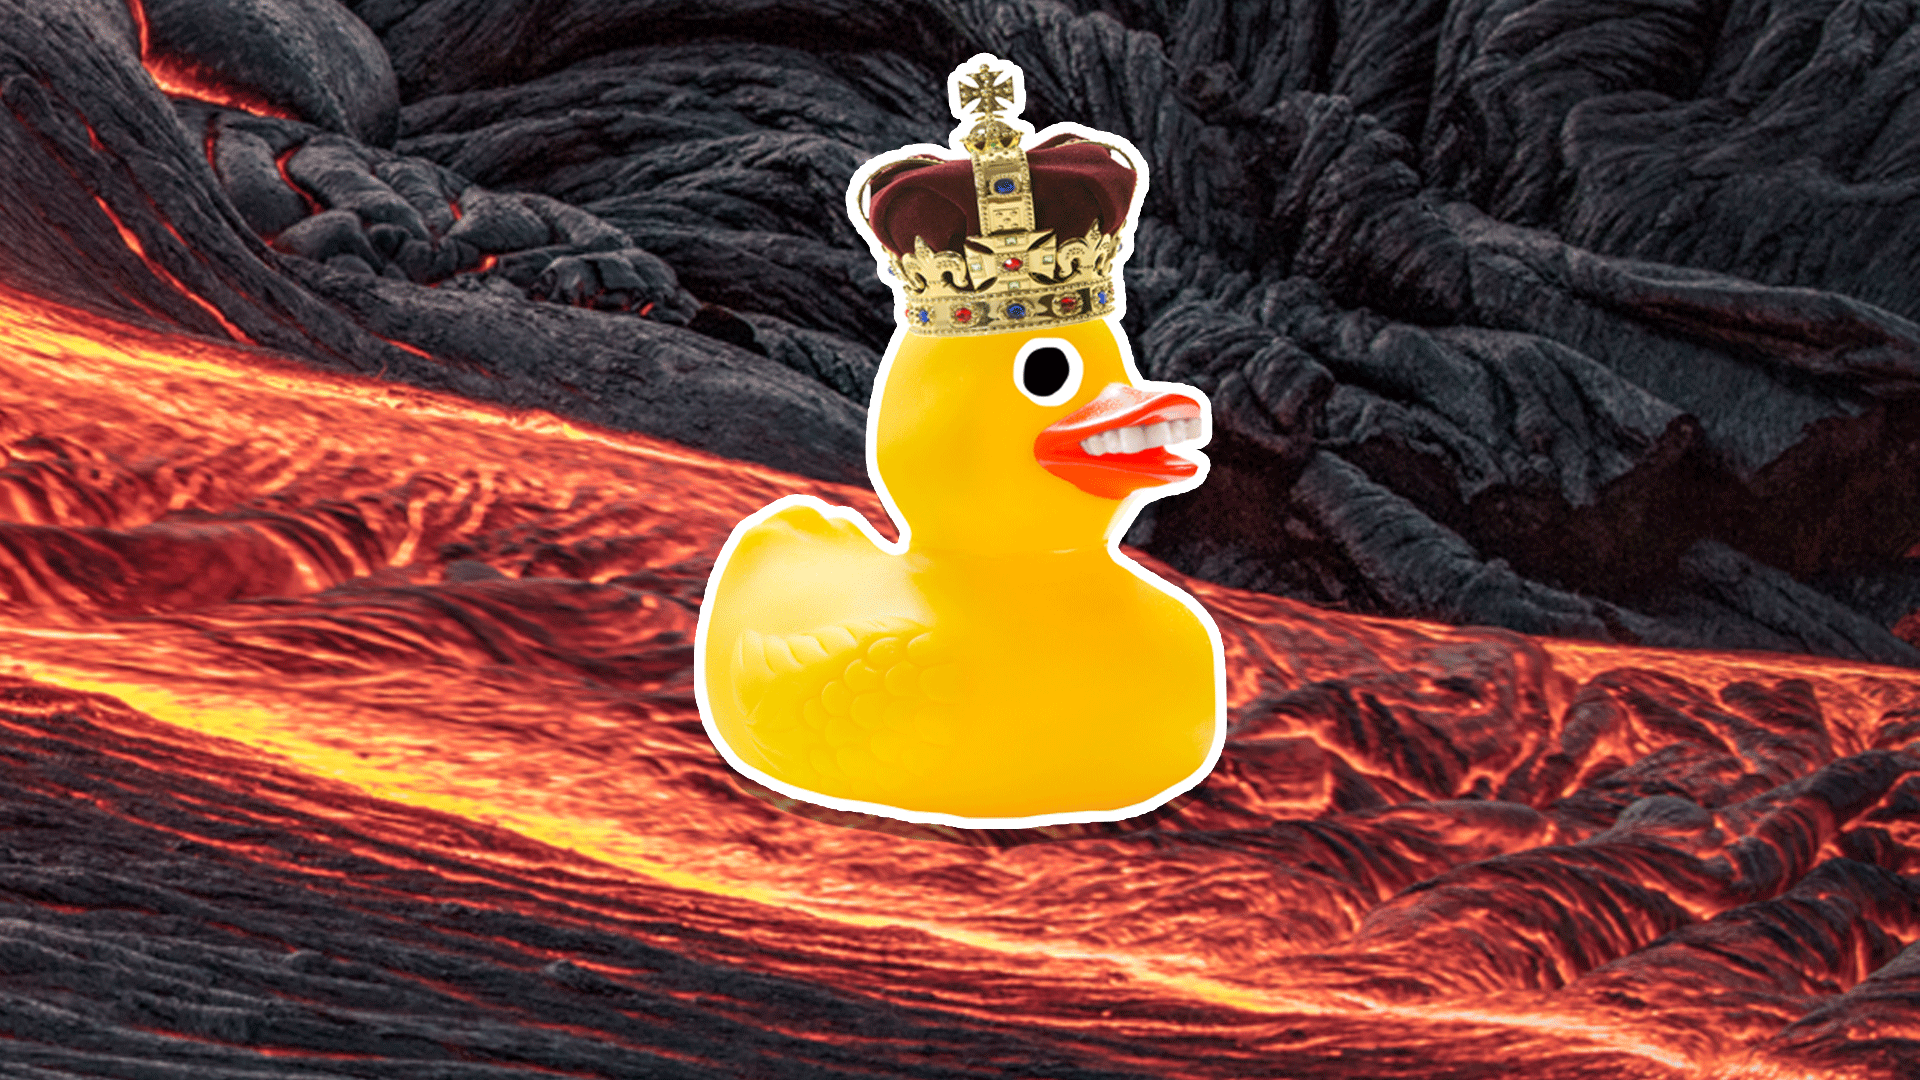 A rubber duck floating on a river of lava